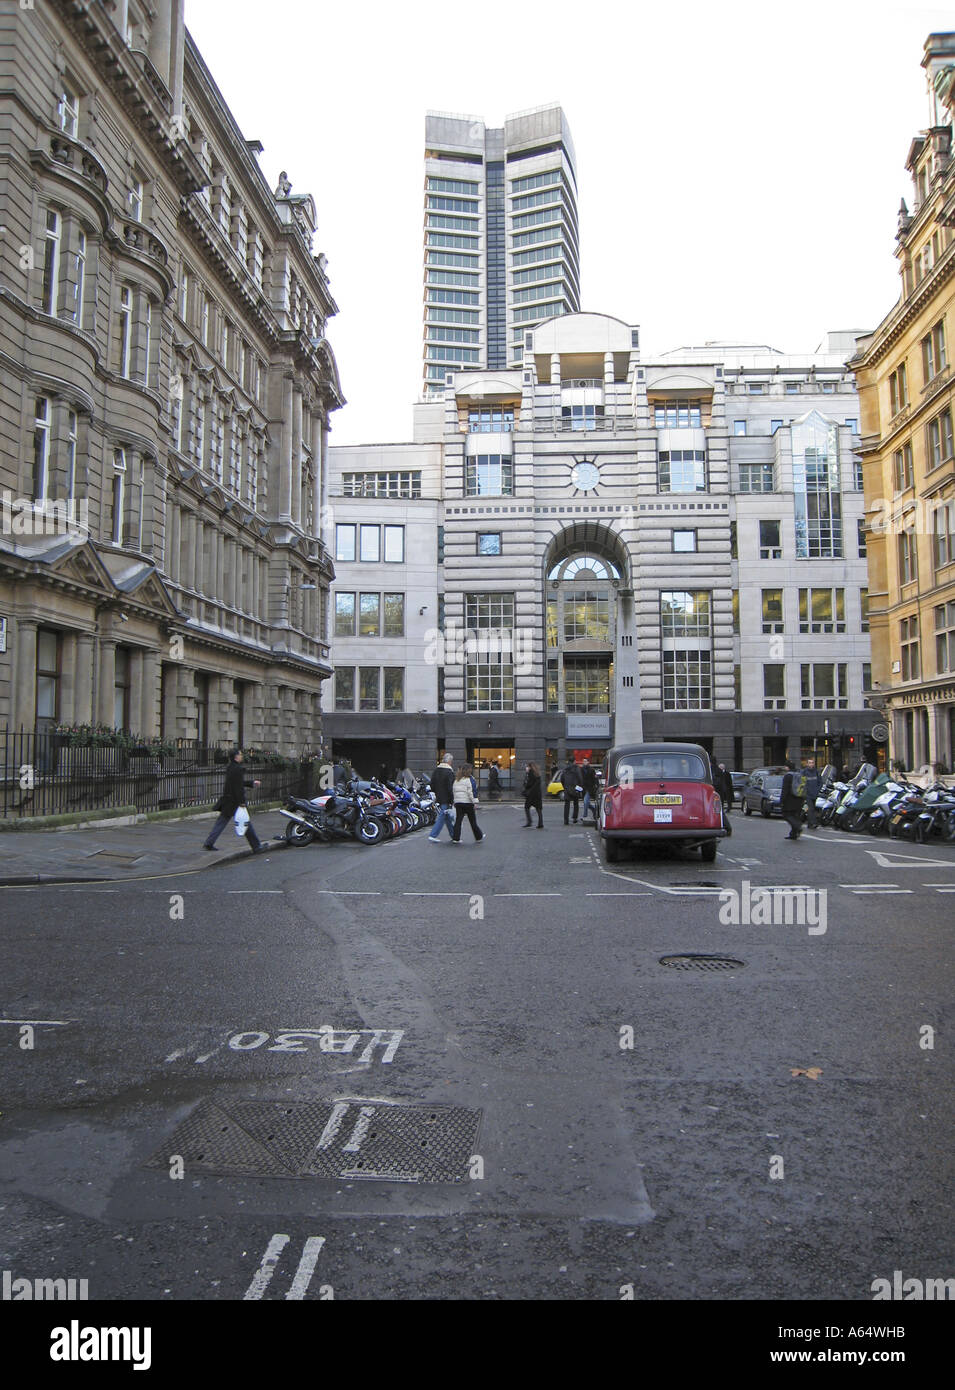 Finsbury Circus, Broadgate, City of London with taxi and motorcycle parking Stock Photo